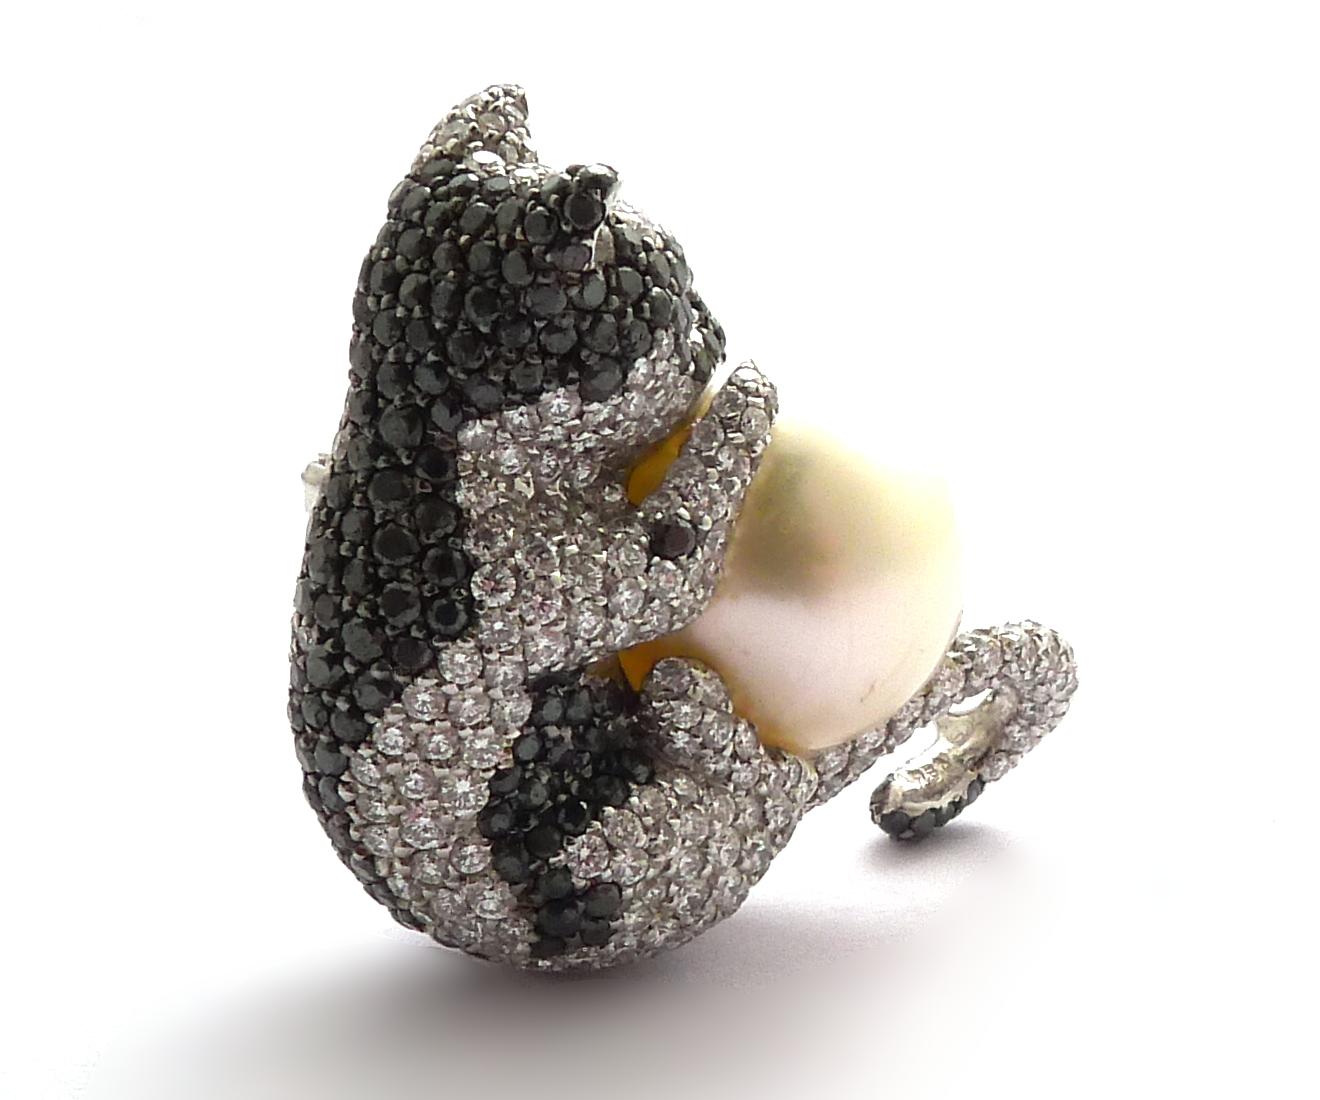 - 1 cultured pearl: 16.77 ct, white, South Sea quality
- Round black diamonds: 1.78 ct total
- Round diamonds: 3.64 ct total
- Gold: 16.36 gr